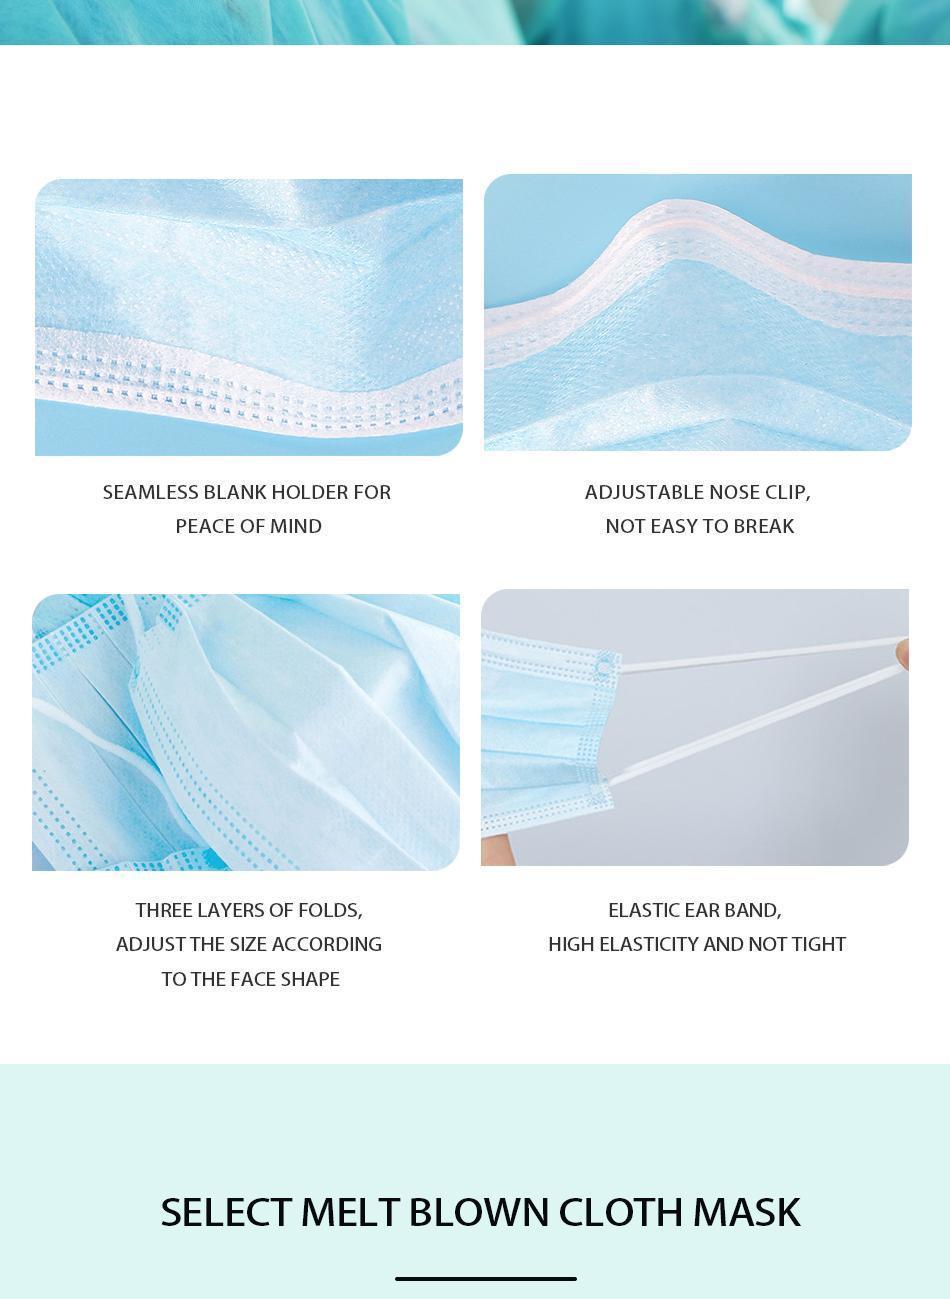 High Quality High Performance Disposable 3 Layer Adult Anti Dust Pm2.5 Virus FDA 510K CE En14683 Approved Non-Woven Fabric Blue Medical Face Mask